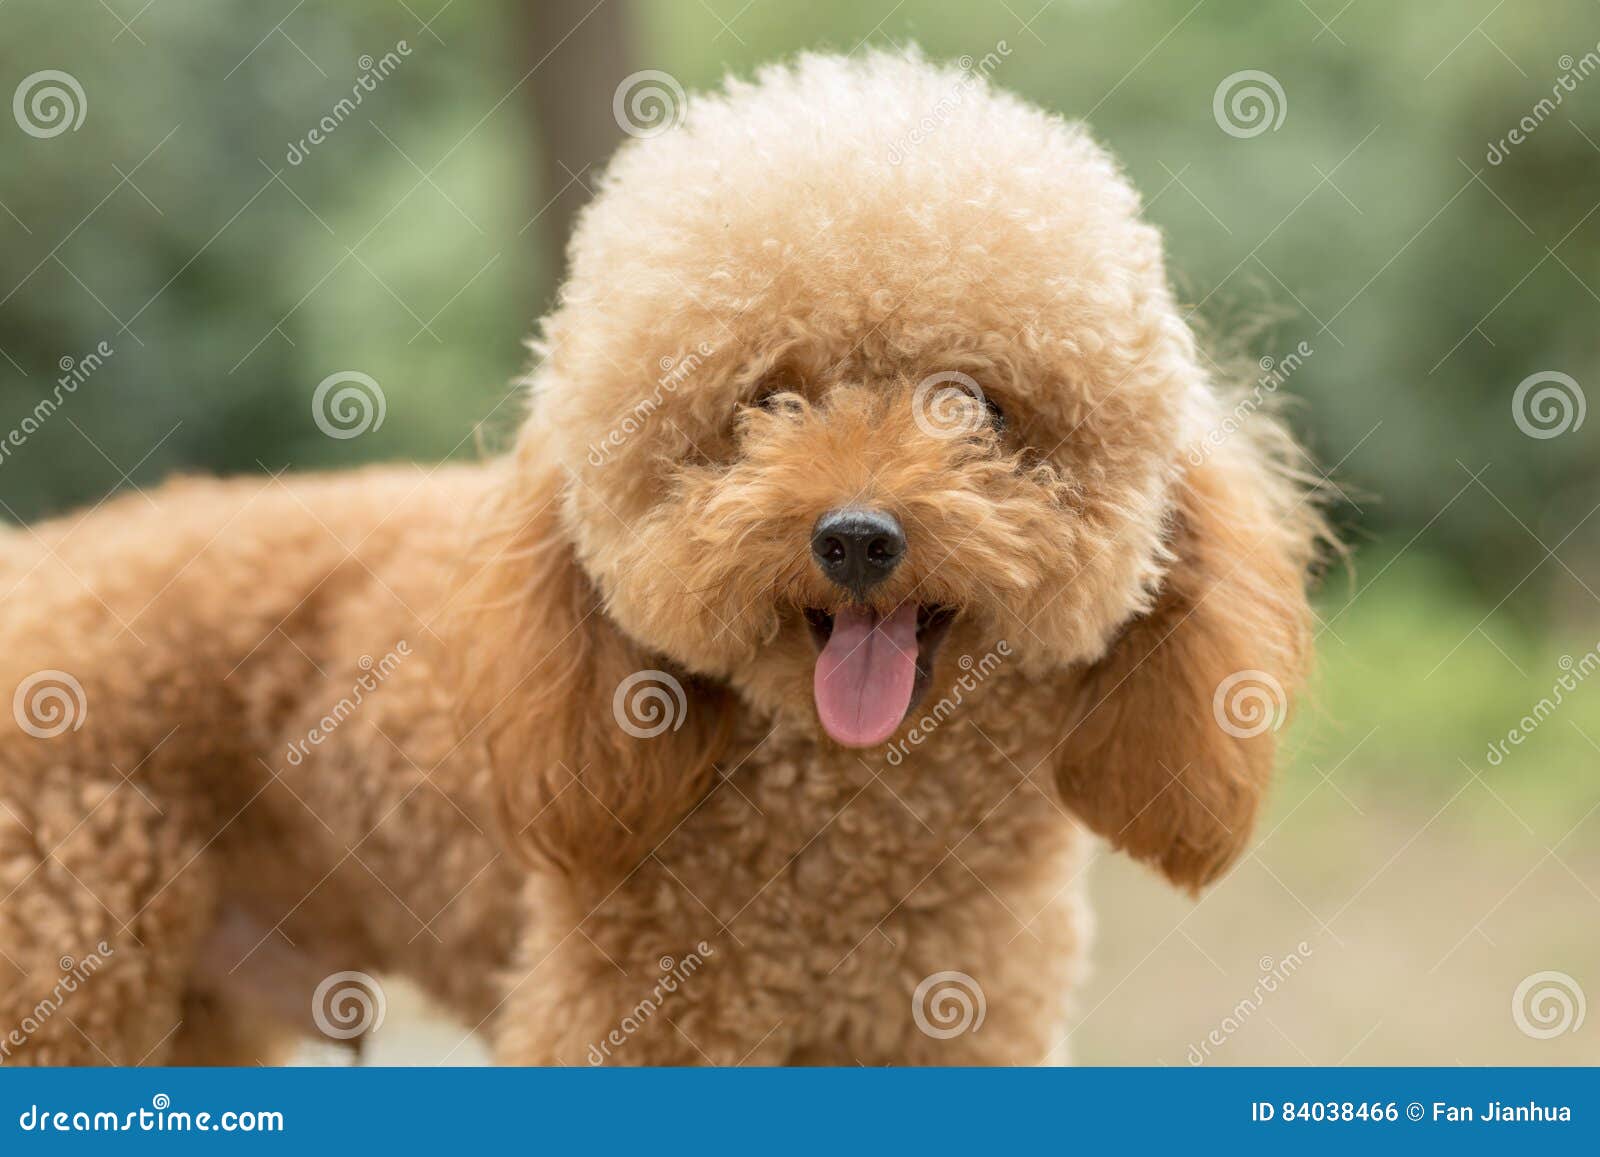 toy poodle fluffy